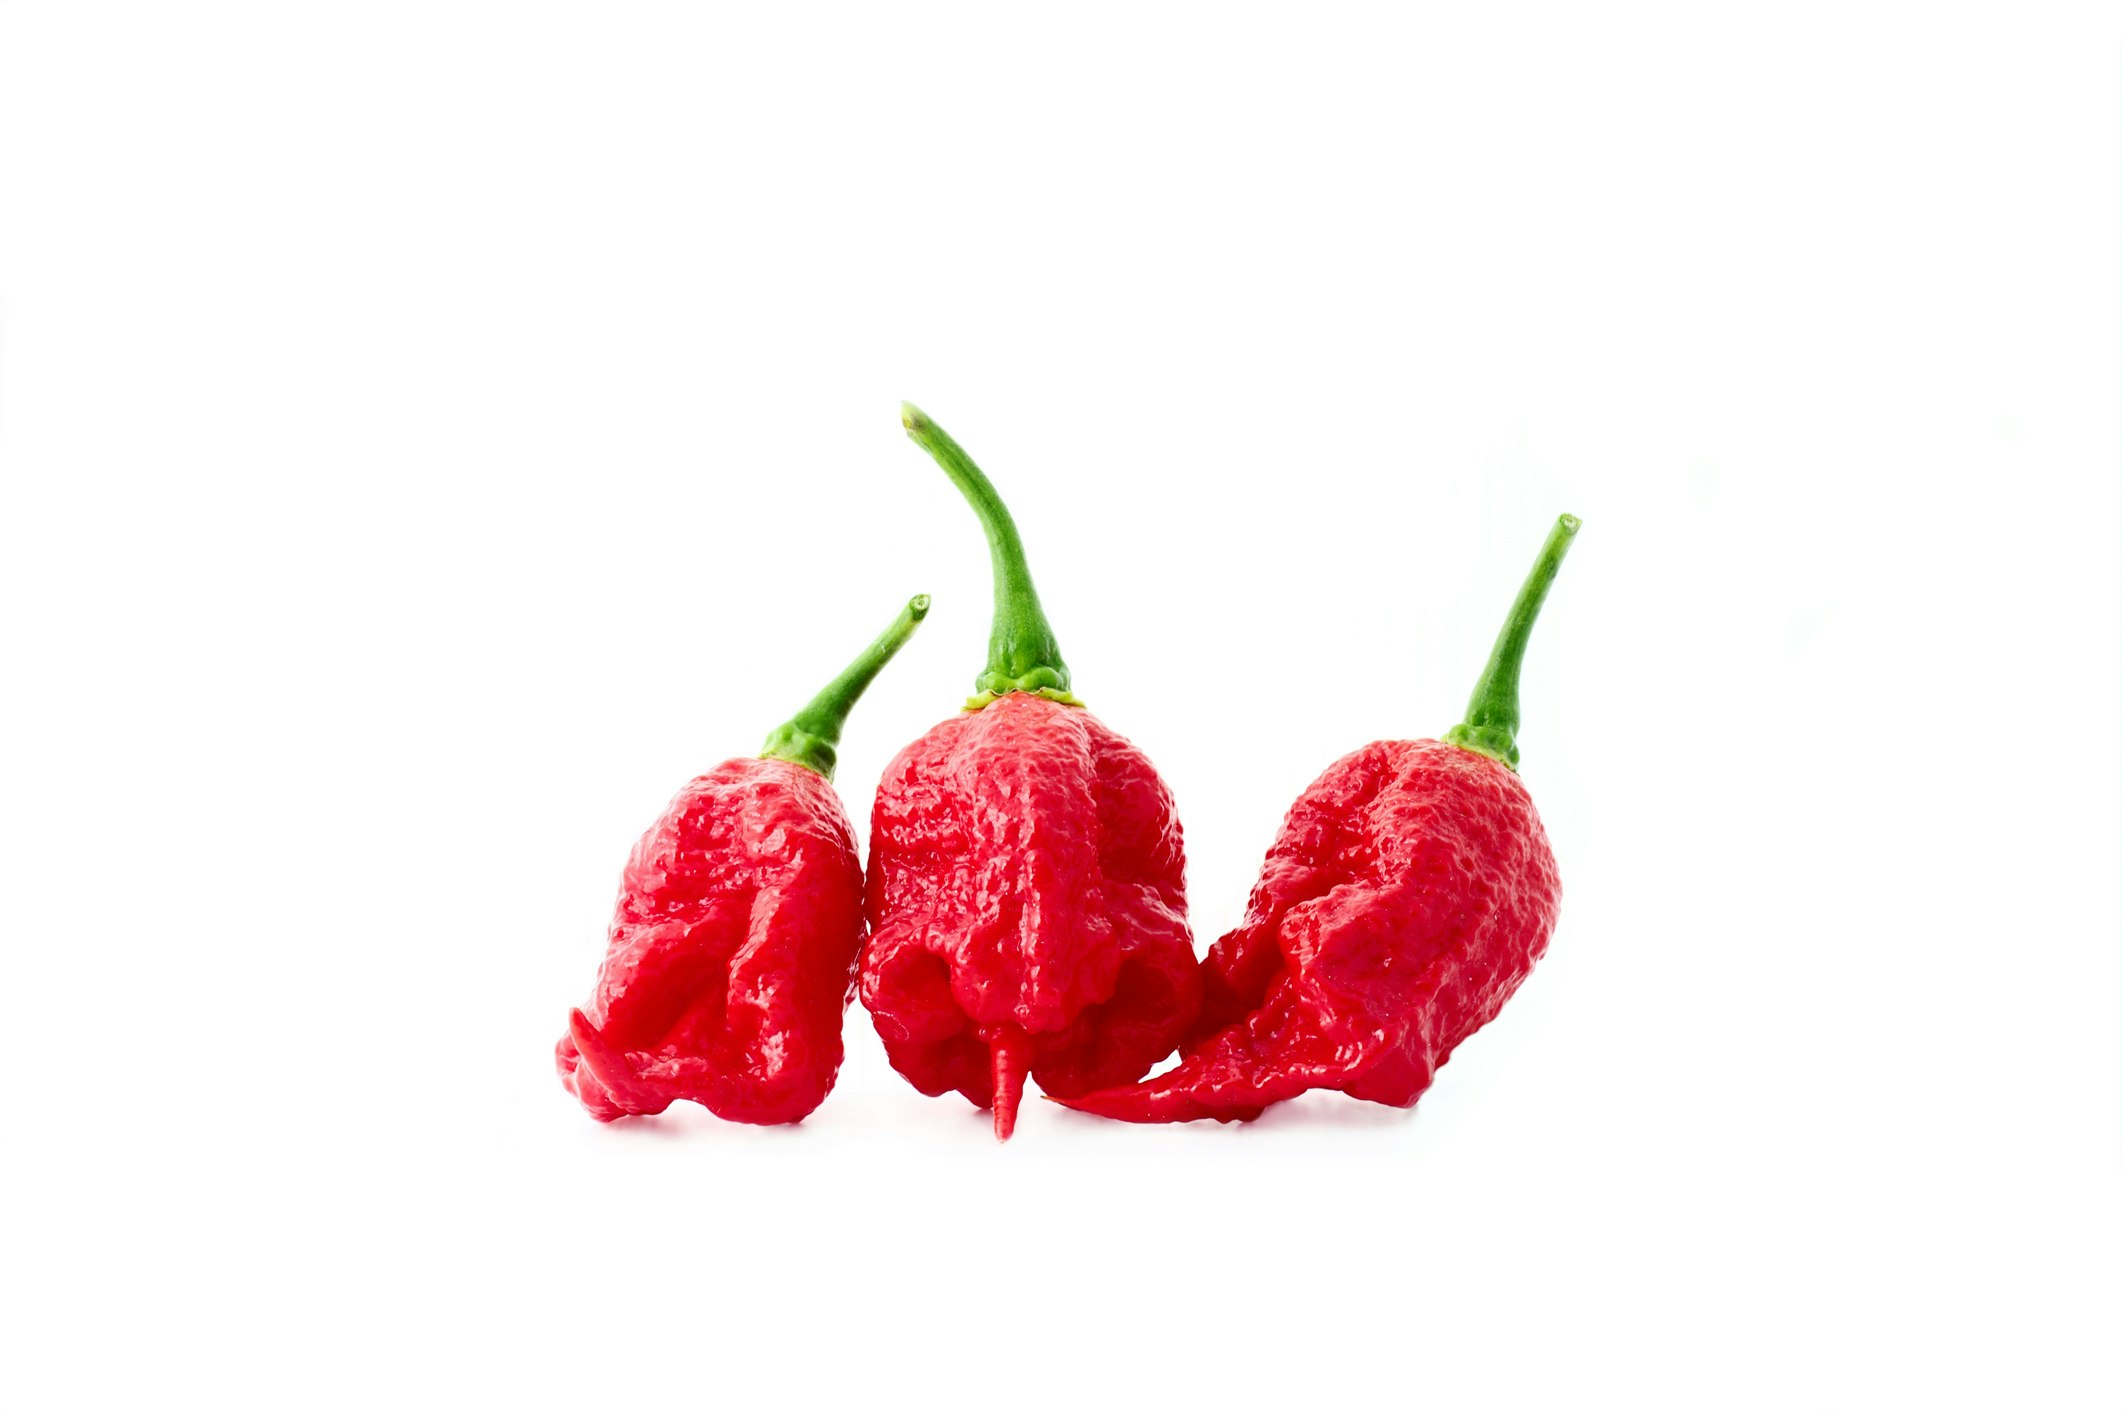 Travel News - Close-Up Of Carolina Reapers Over White Background